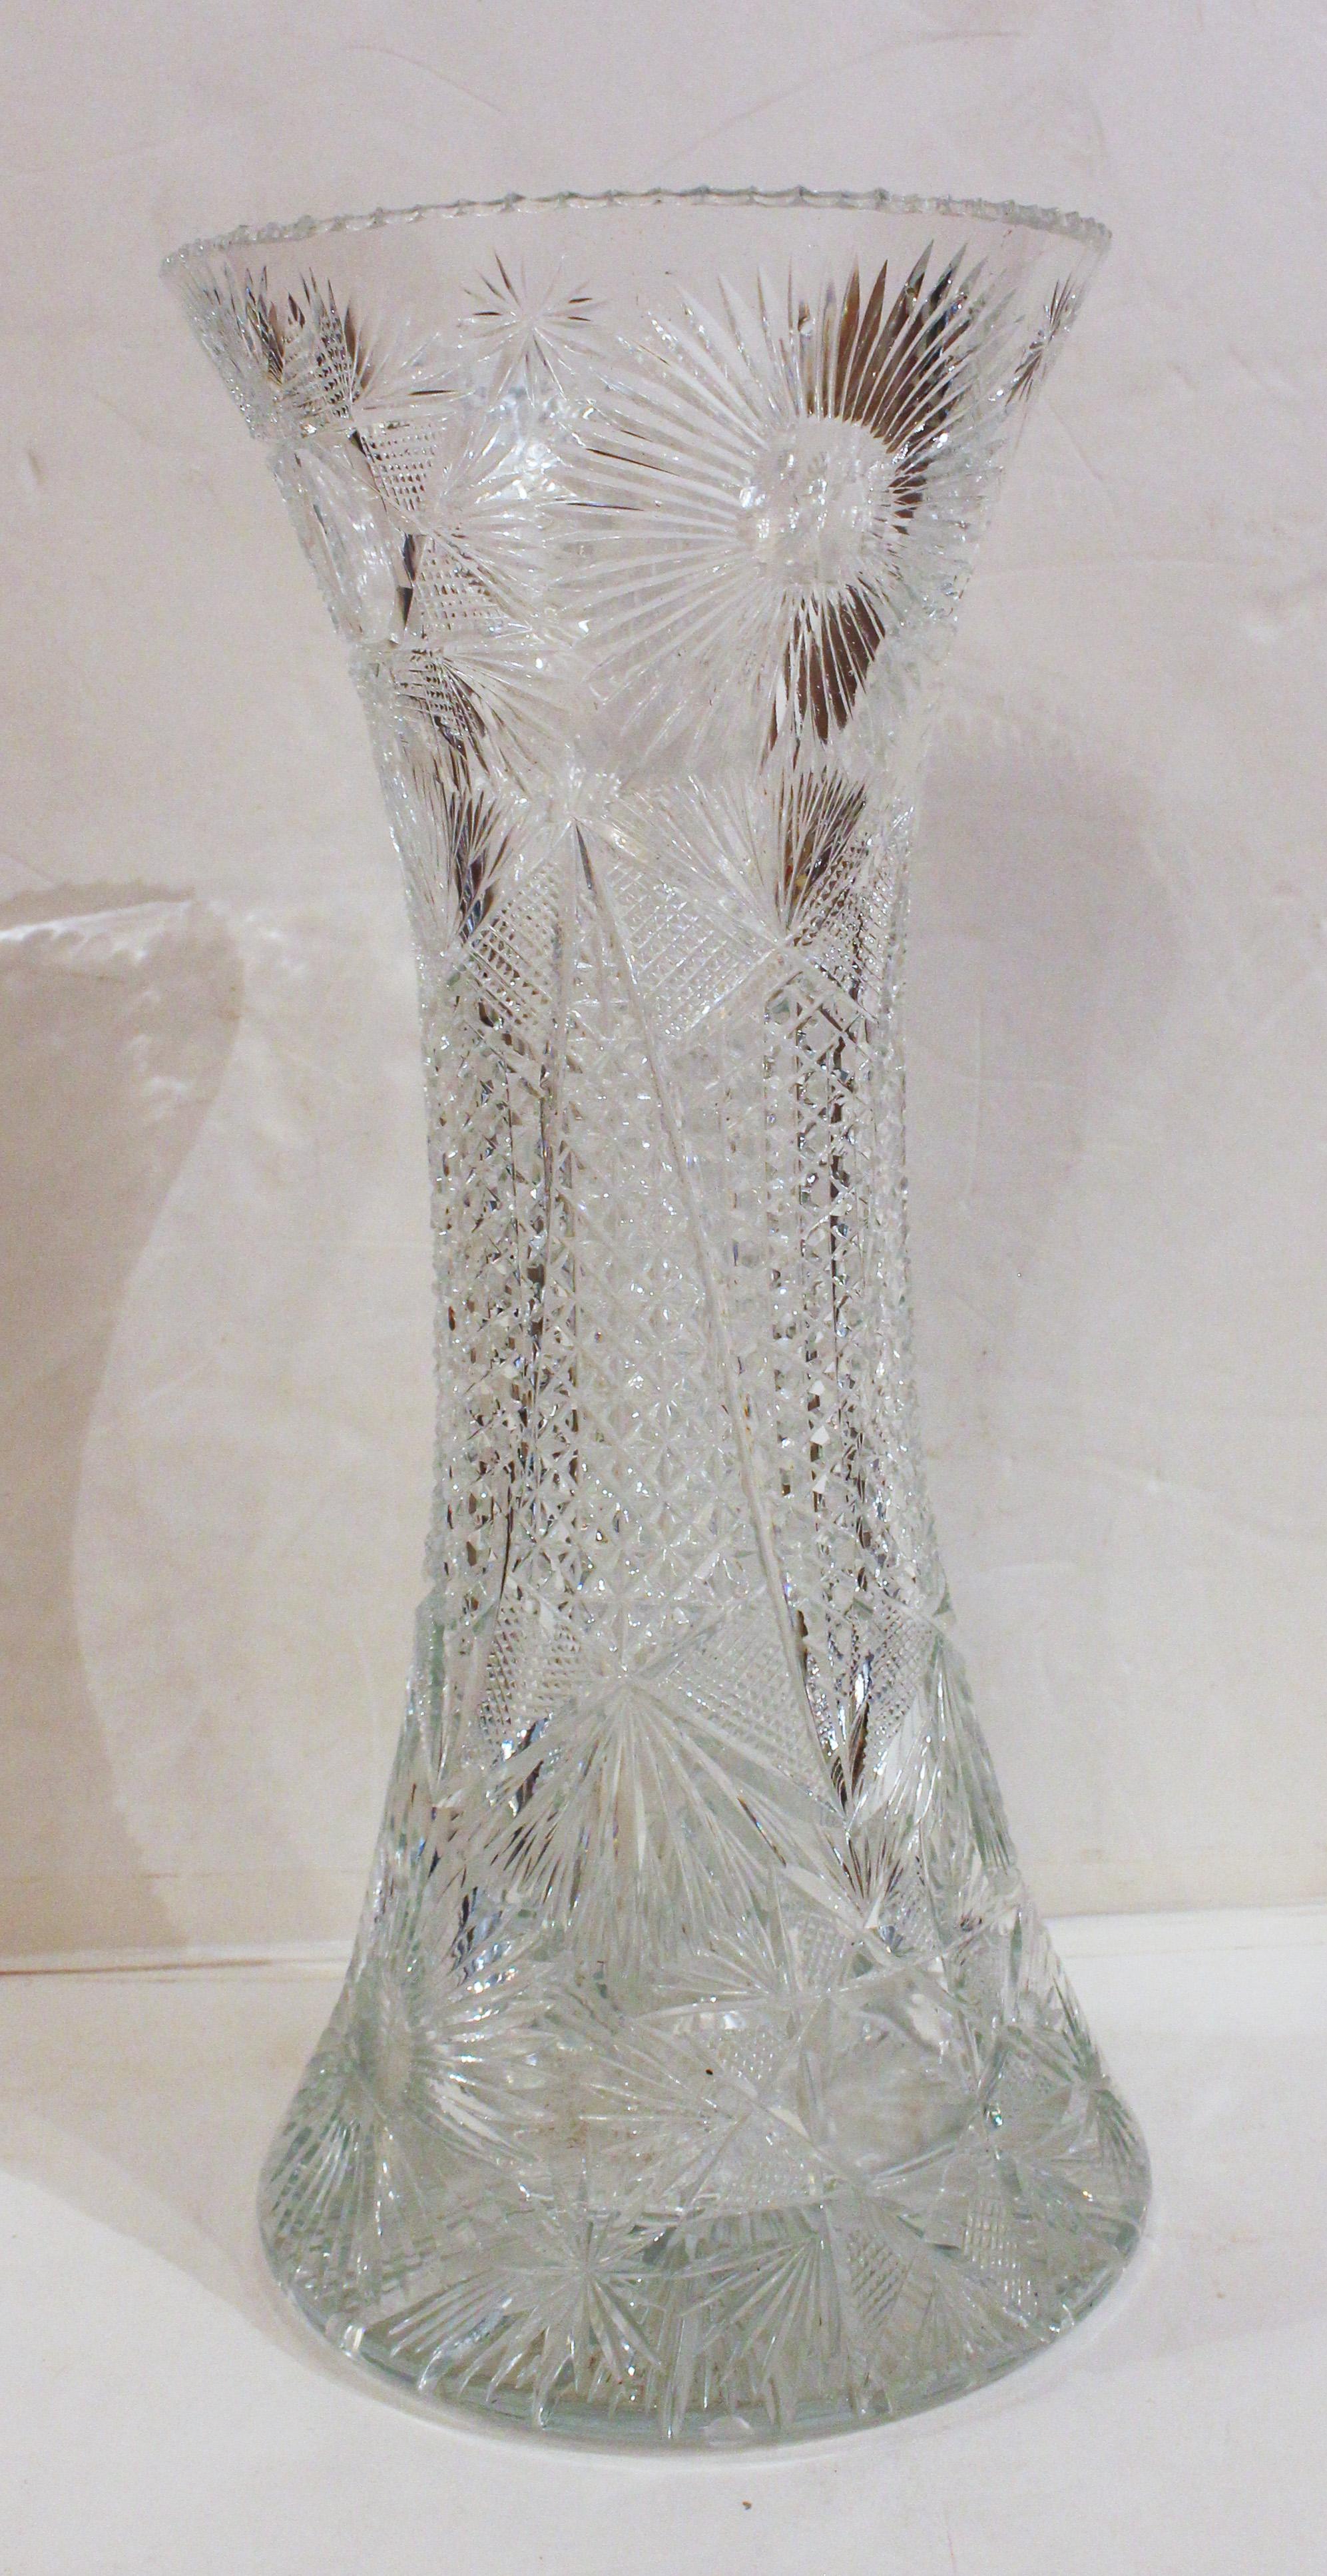 A monumental hand blown & cut glass vase, American brilliant period, c.1895. Spectacularly decorated with flowers, caned panels, diamond panels & star cut base. A few very minor nicks.
19.5